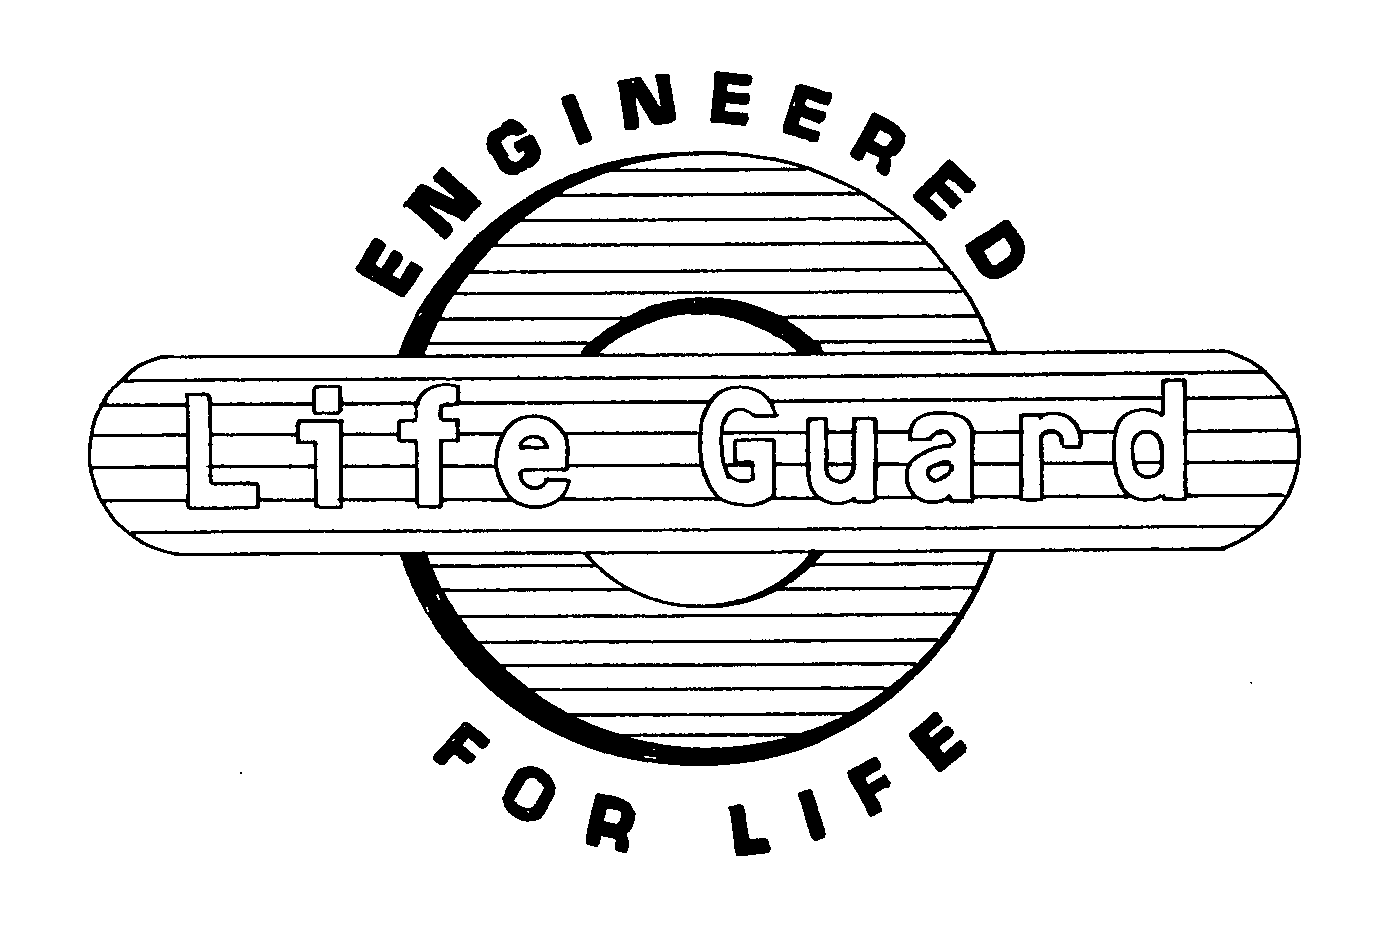  LIFE GUARD ENGINEERED FOR LIFE